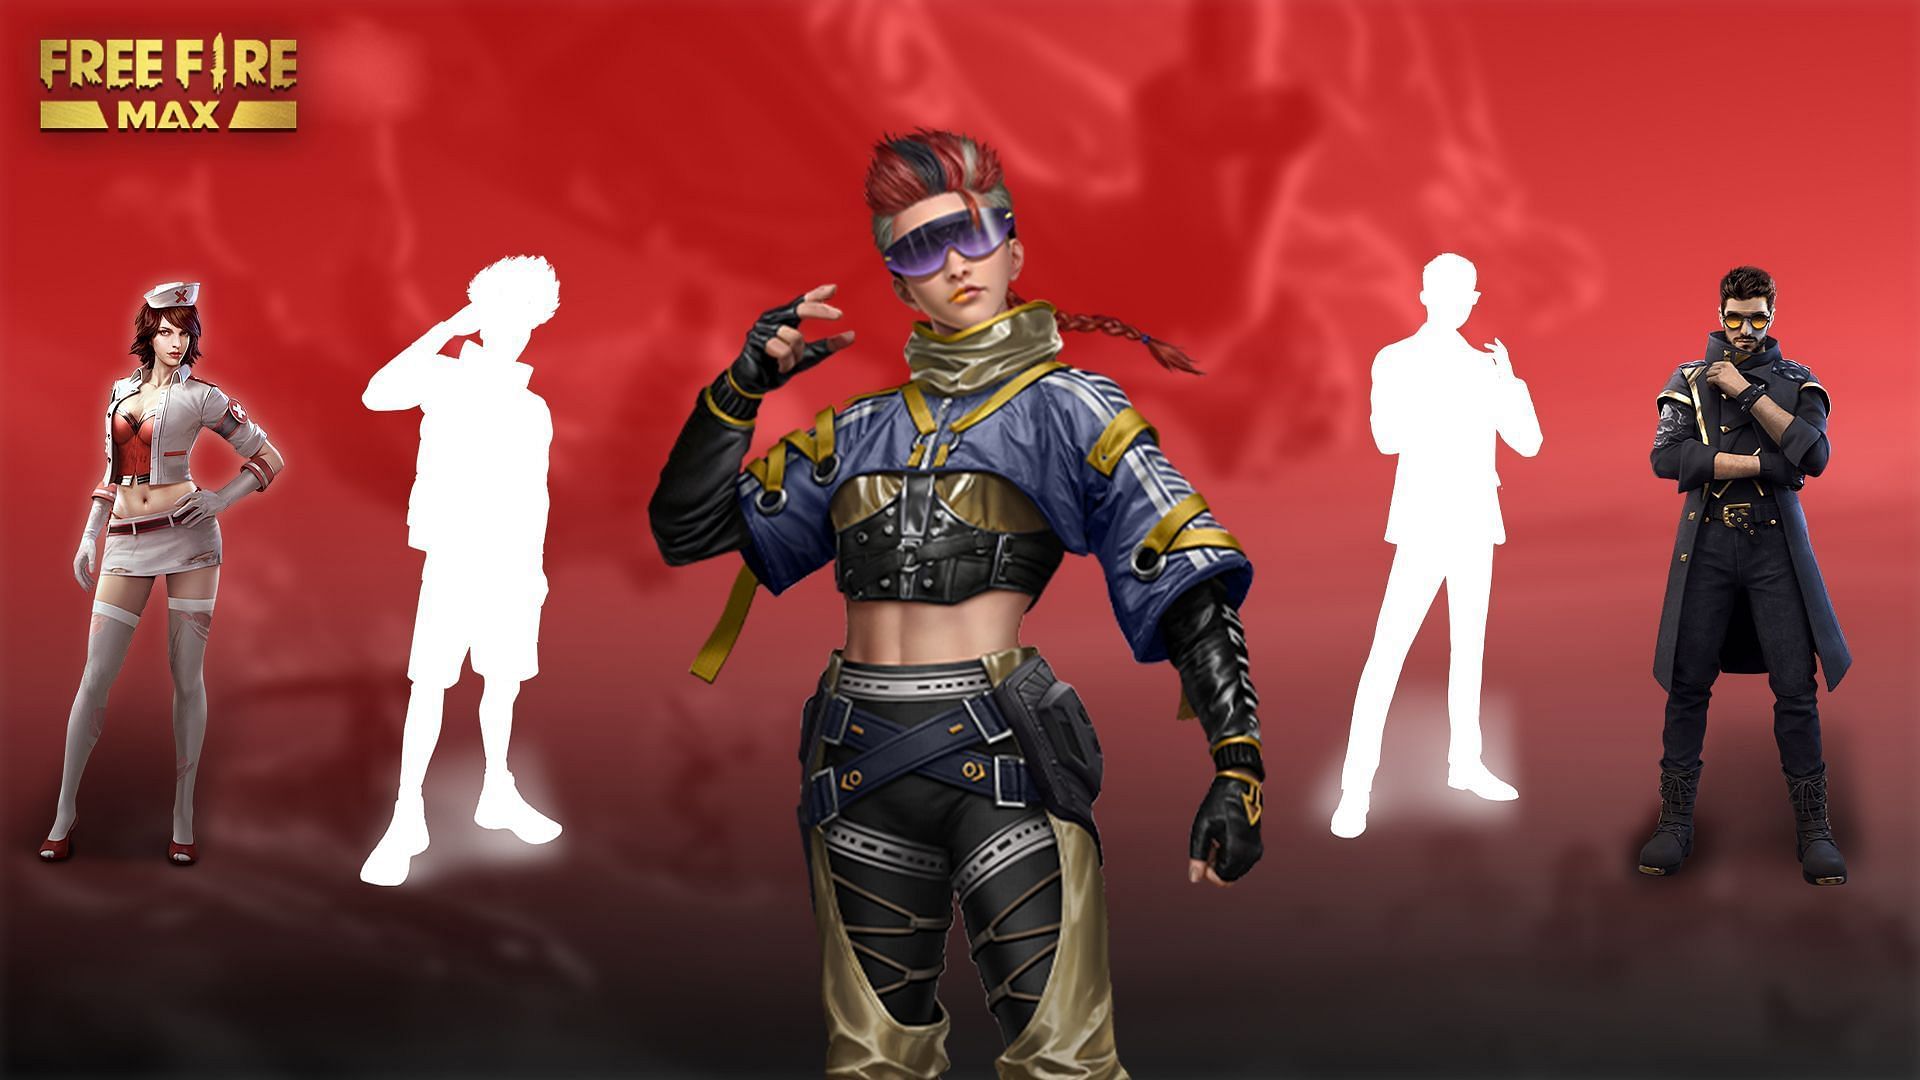 These Free Fire MAX characters will allow users to recover HP (Image via Sportskeeda)